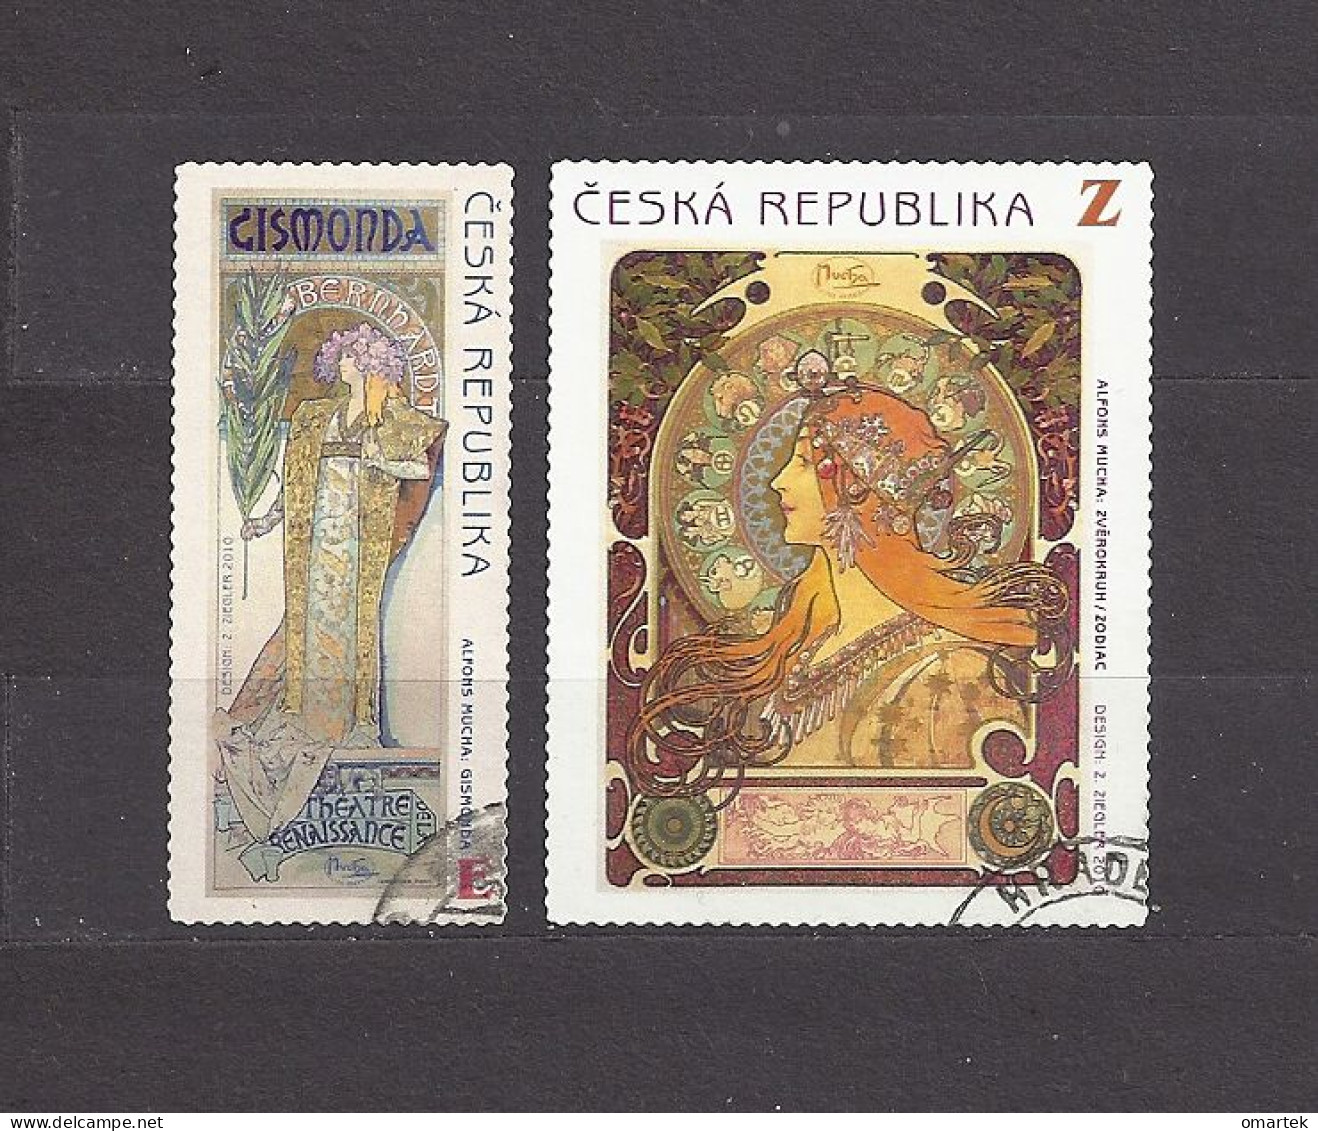 Czech Republic 2010 ⊙ Mi 633-634 Sc 3454-3455 Alfons Mucha – E And Z Stamps. Tschechische Republik. C2 - Used Stamps